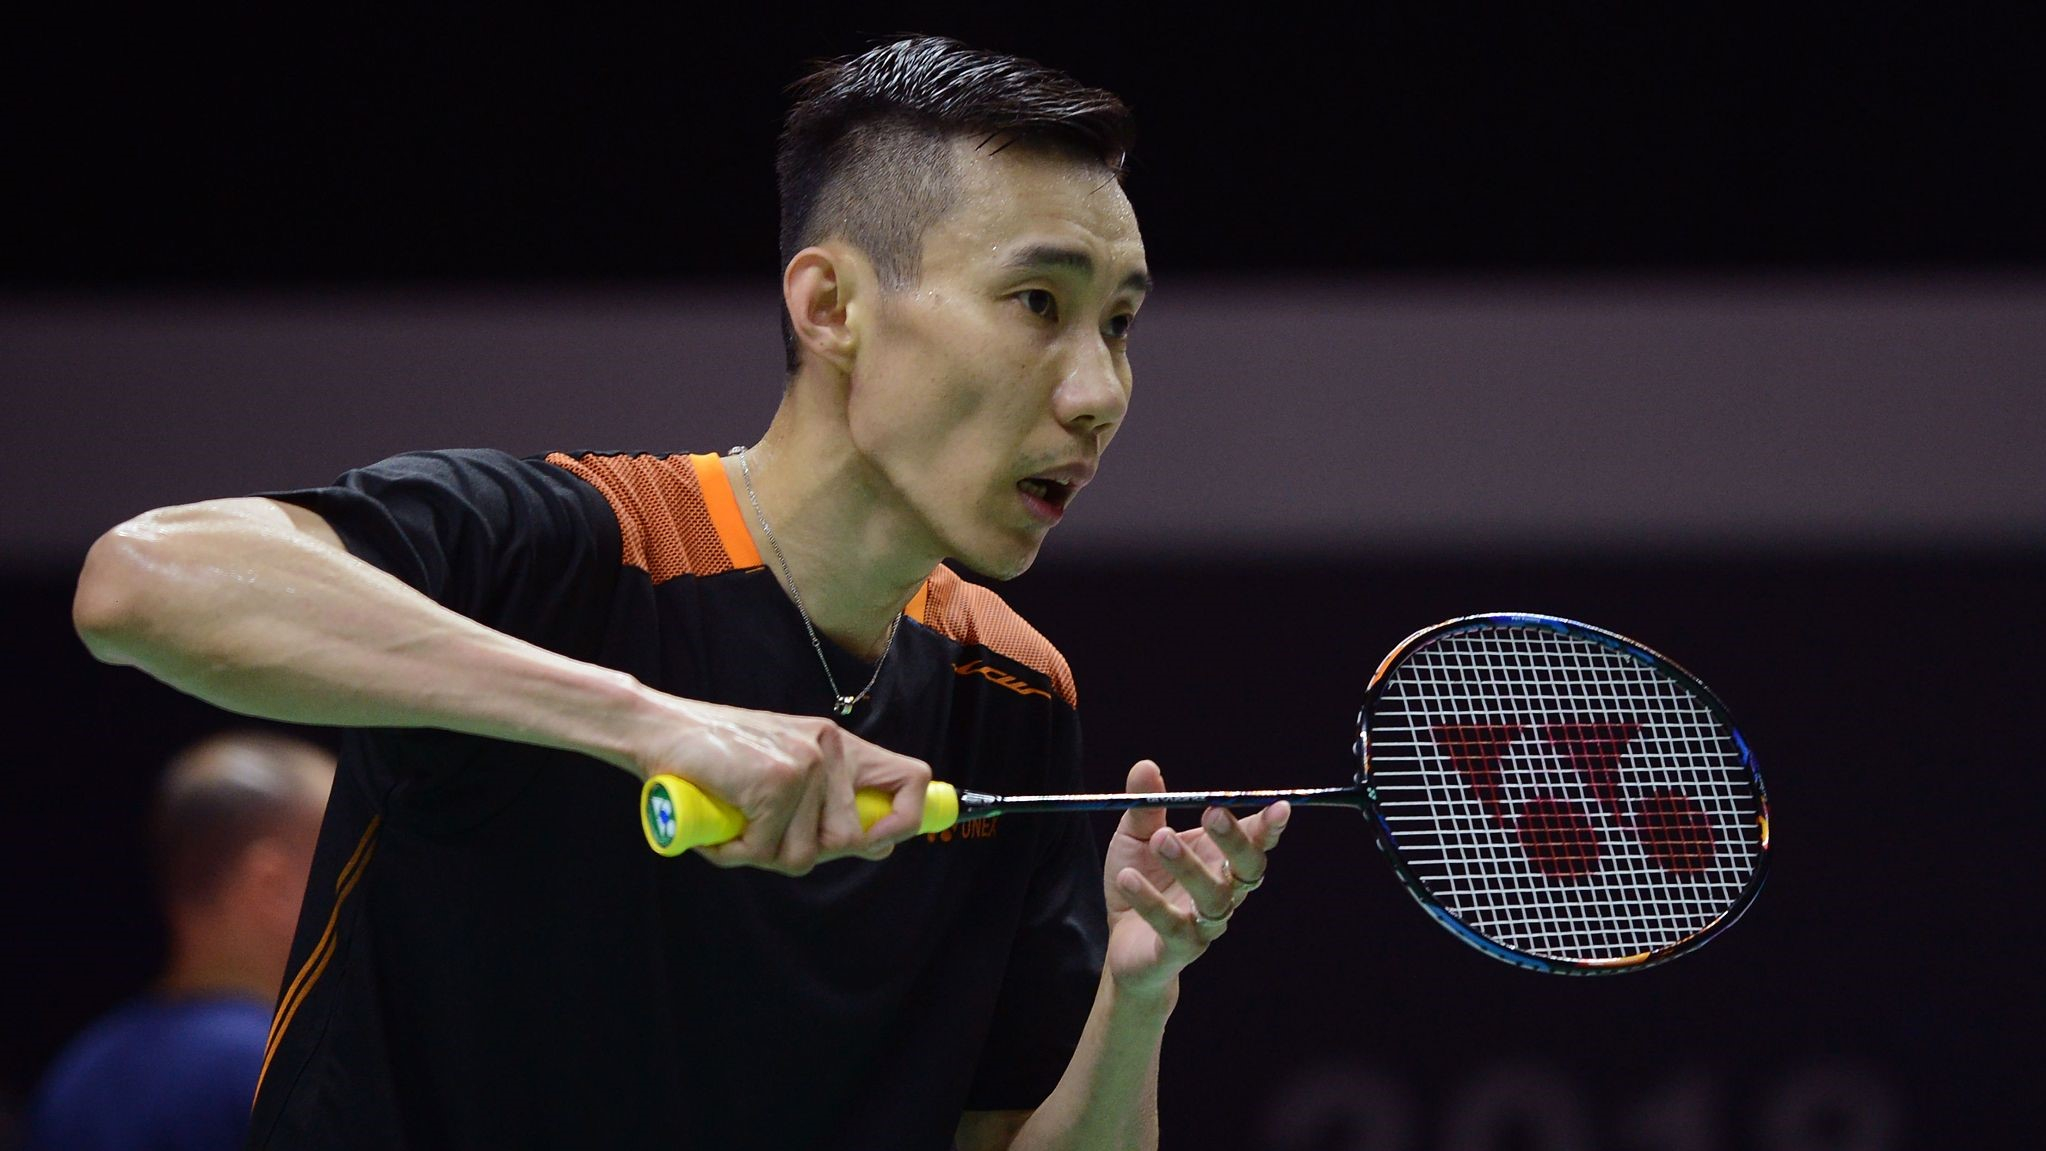 Cancer-hit Lee Chong Wei plans to return in April - CGTN